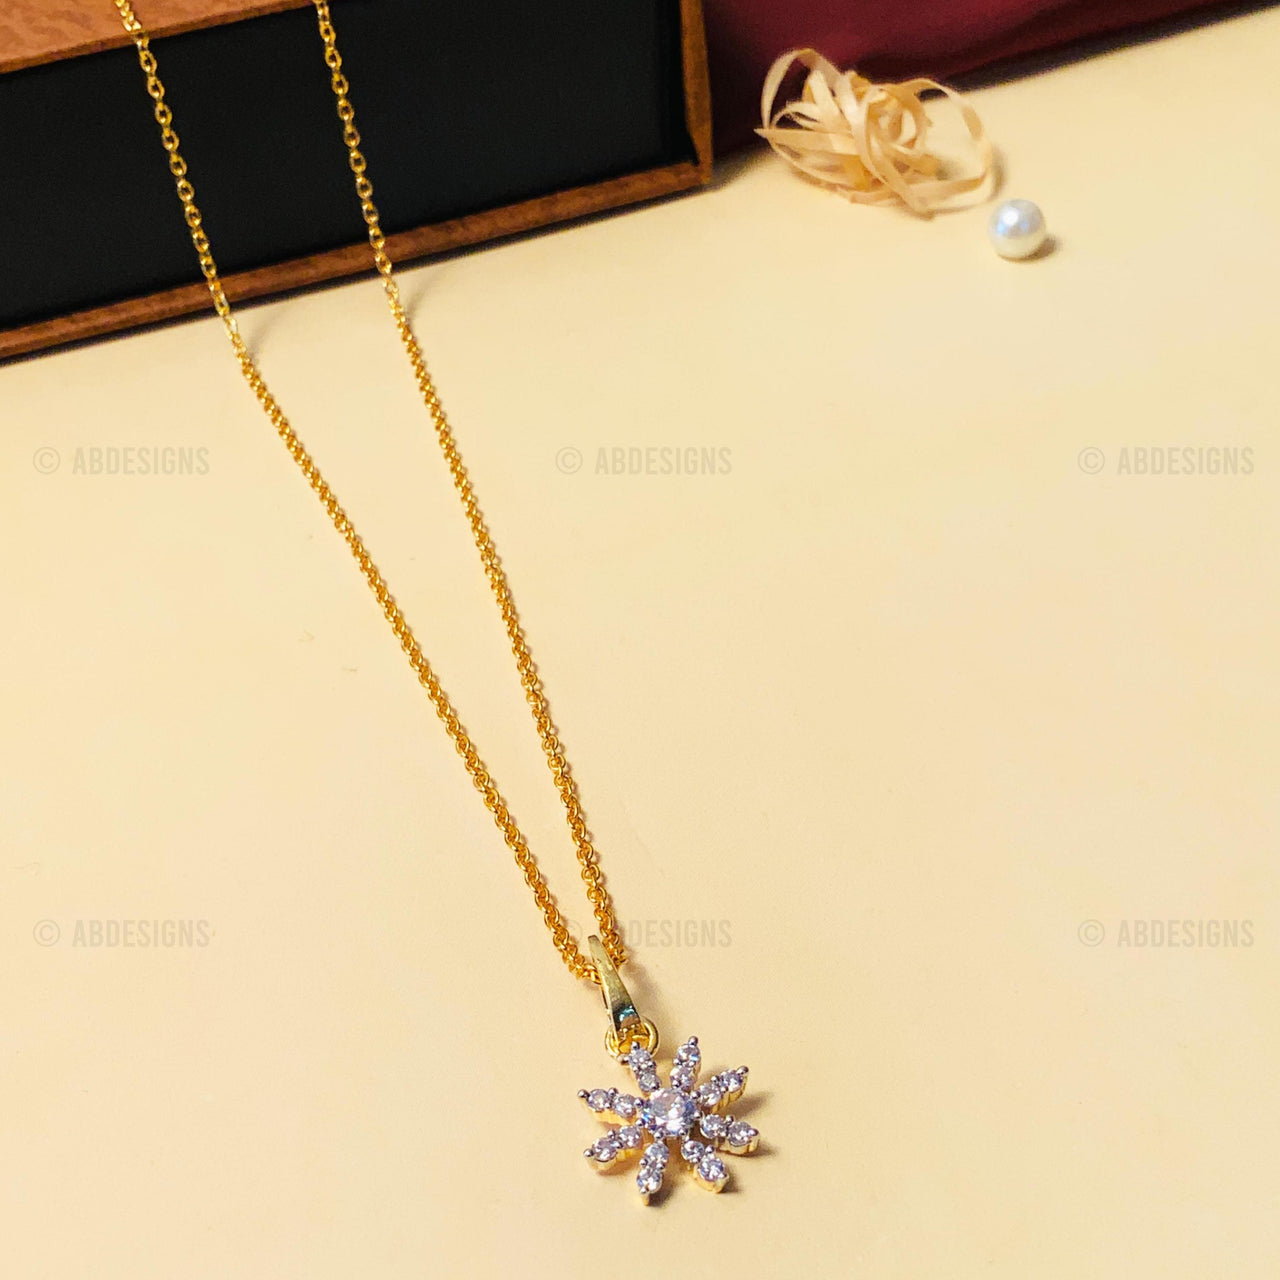 Mesmerizing High-Quality Gold Plated Pendant Chain